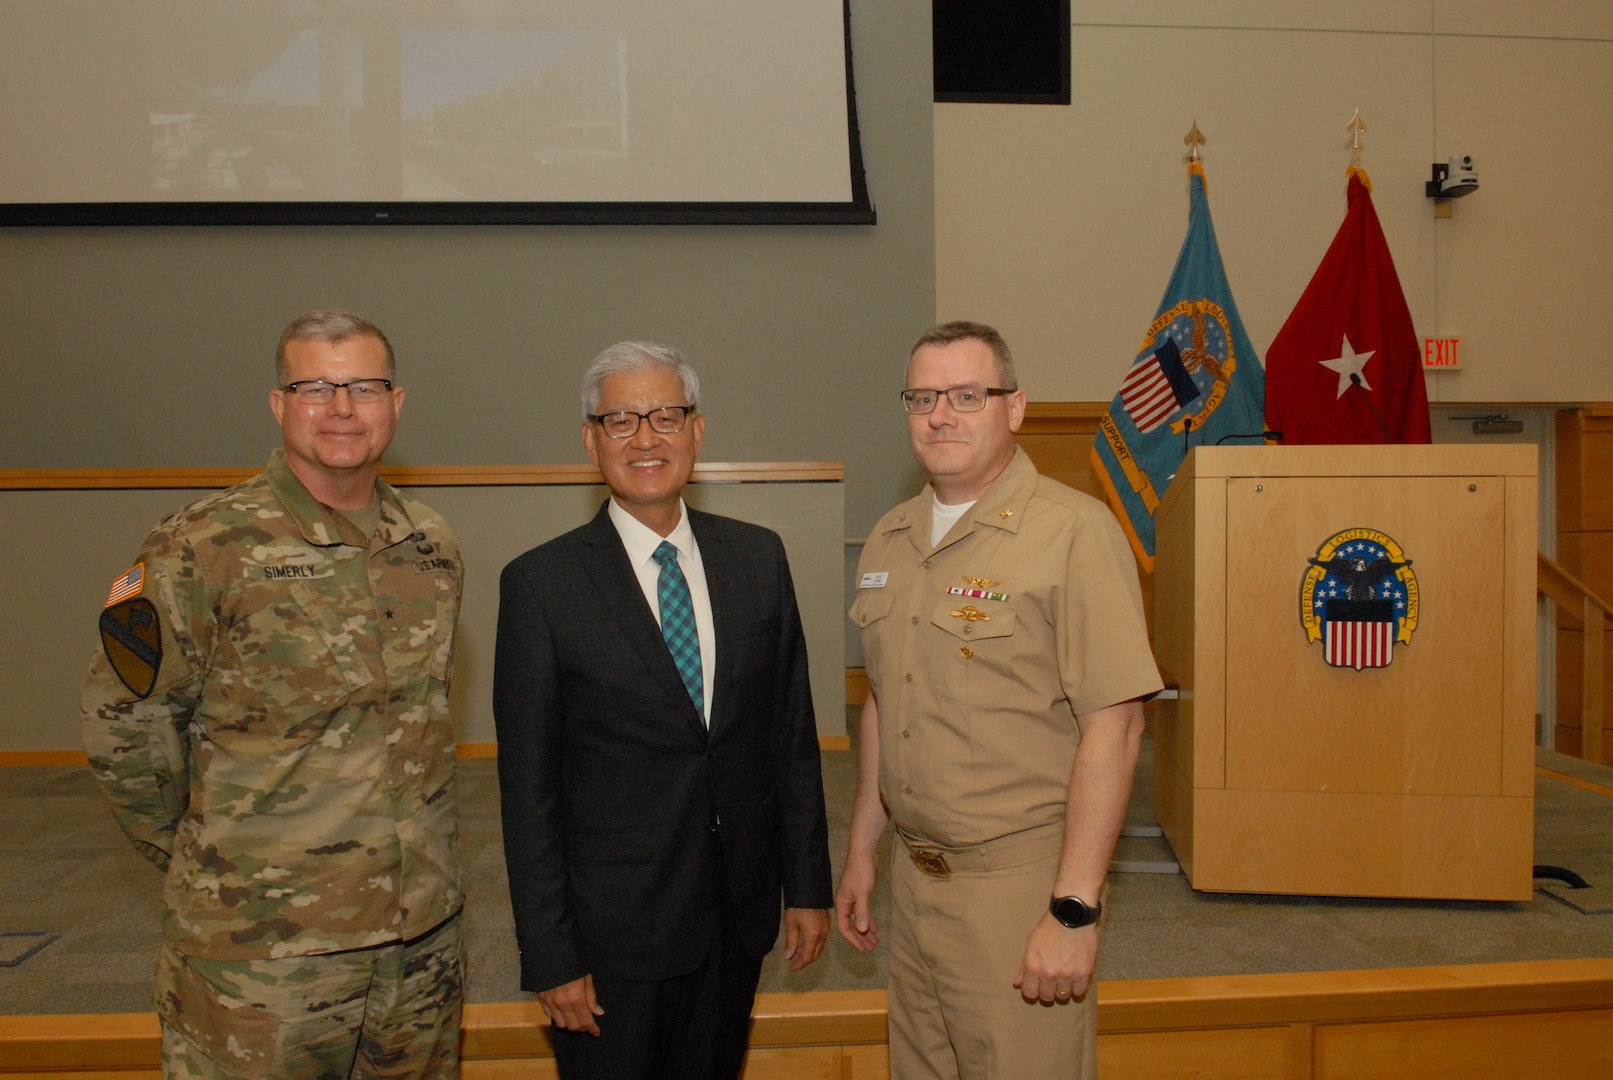 DLA Troop Support Commander Army Brig. Gen. Mark Simerly, left, poses with Asian American Pacific Islander Heritage Month event guest speaker Timothy Haahs, an architect, engineer and entrepreneur, and NAVSUP Weapons Systems Support Deputy Commander Navy Capt. David Ludwa May 24, 2018. During the event Haahs discussed his experiences growing up in a leper colony in South Korea, coming to the U.S. when he was 12 years old, receiving two heart transplants and becoming a U.S. Senate confirmed appointee to the Board of Directors of the National Institute of Building Sciences. Photo by Ed Maldonado